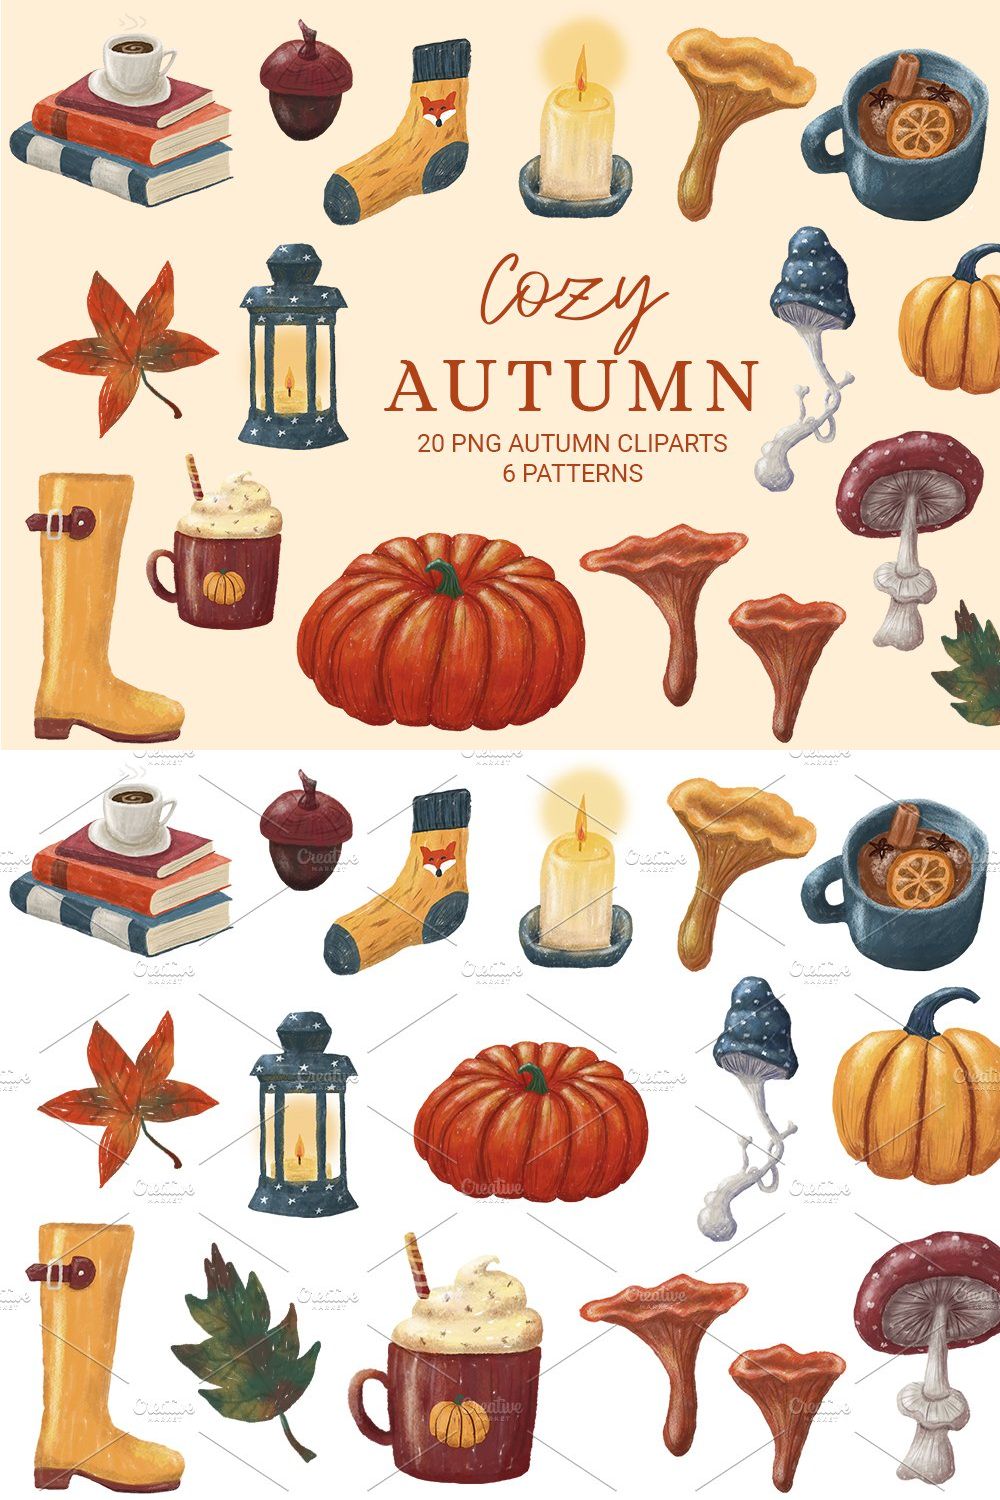 Cozy autumn cliparts, fall set, png pinterest preview image.